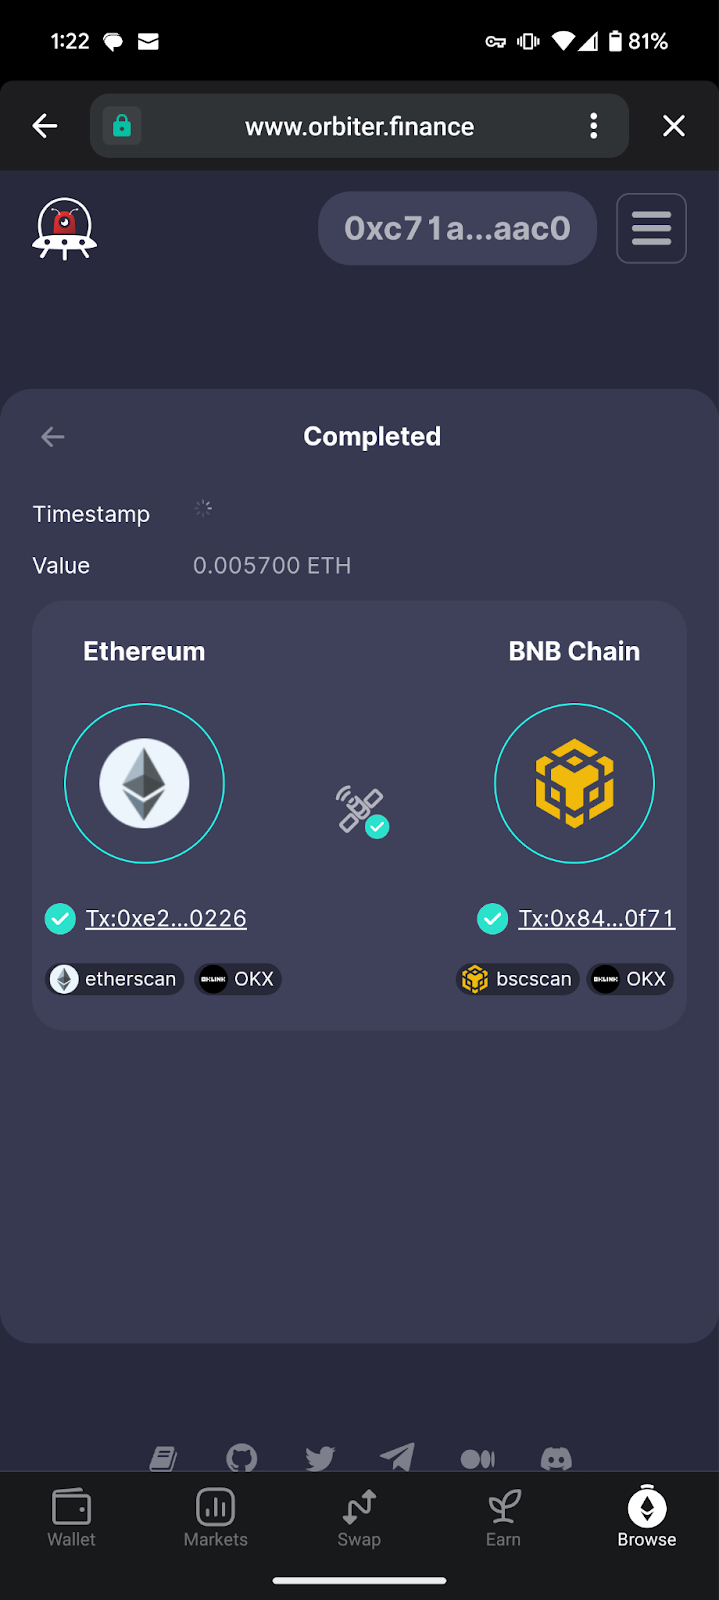 Bridge from Ethereum to BNB Smart Chain with MEW Mobile